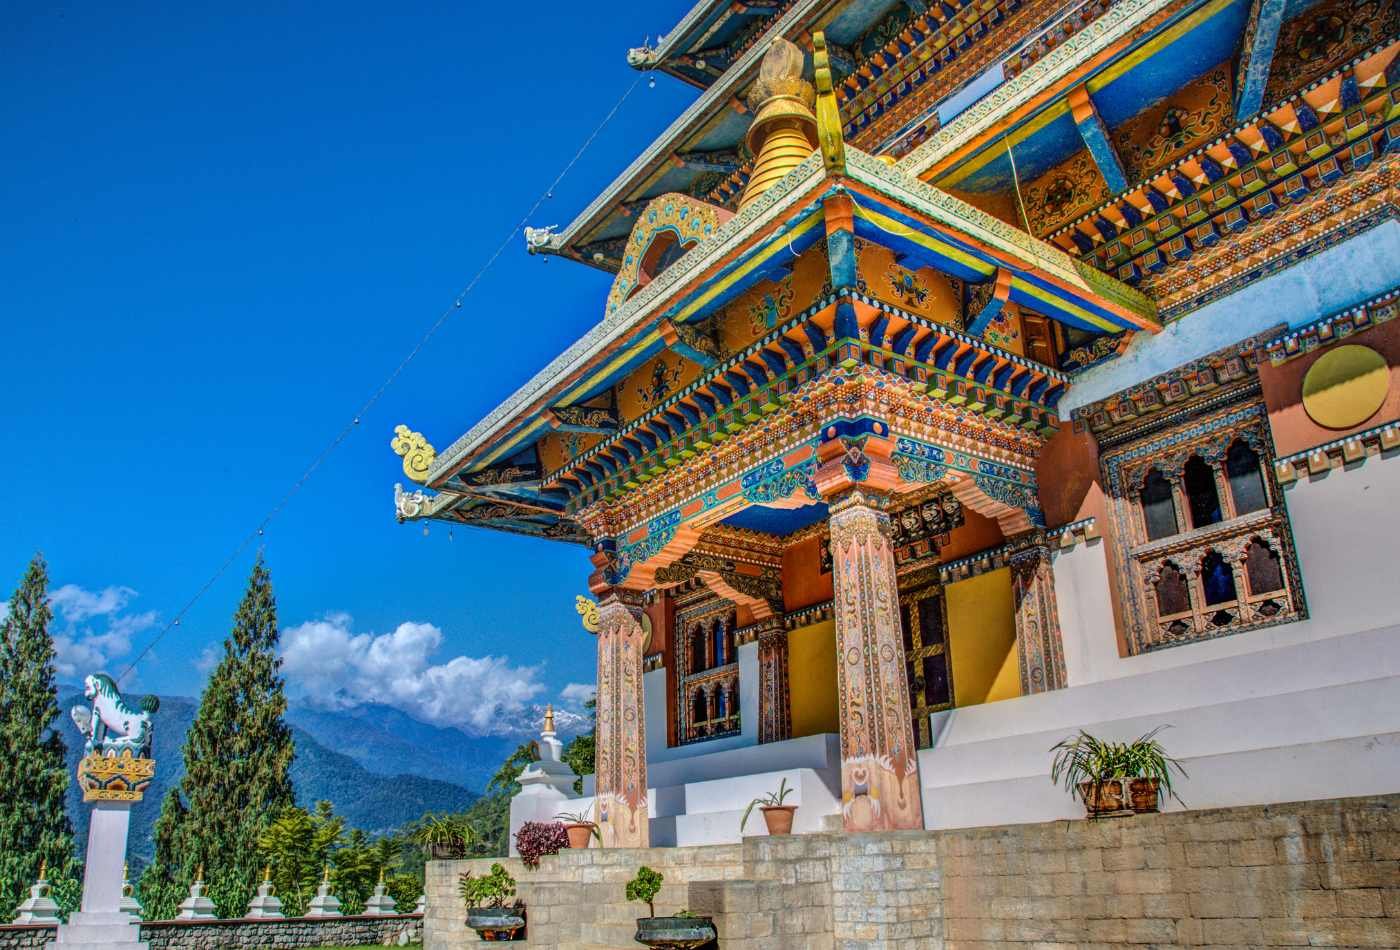 The entrance to the Khamsum Yuelley Namgyal Chorten, an important Bhutanese temple, characterized by its intricate carvings and colorful designs.